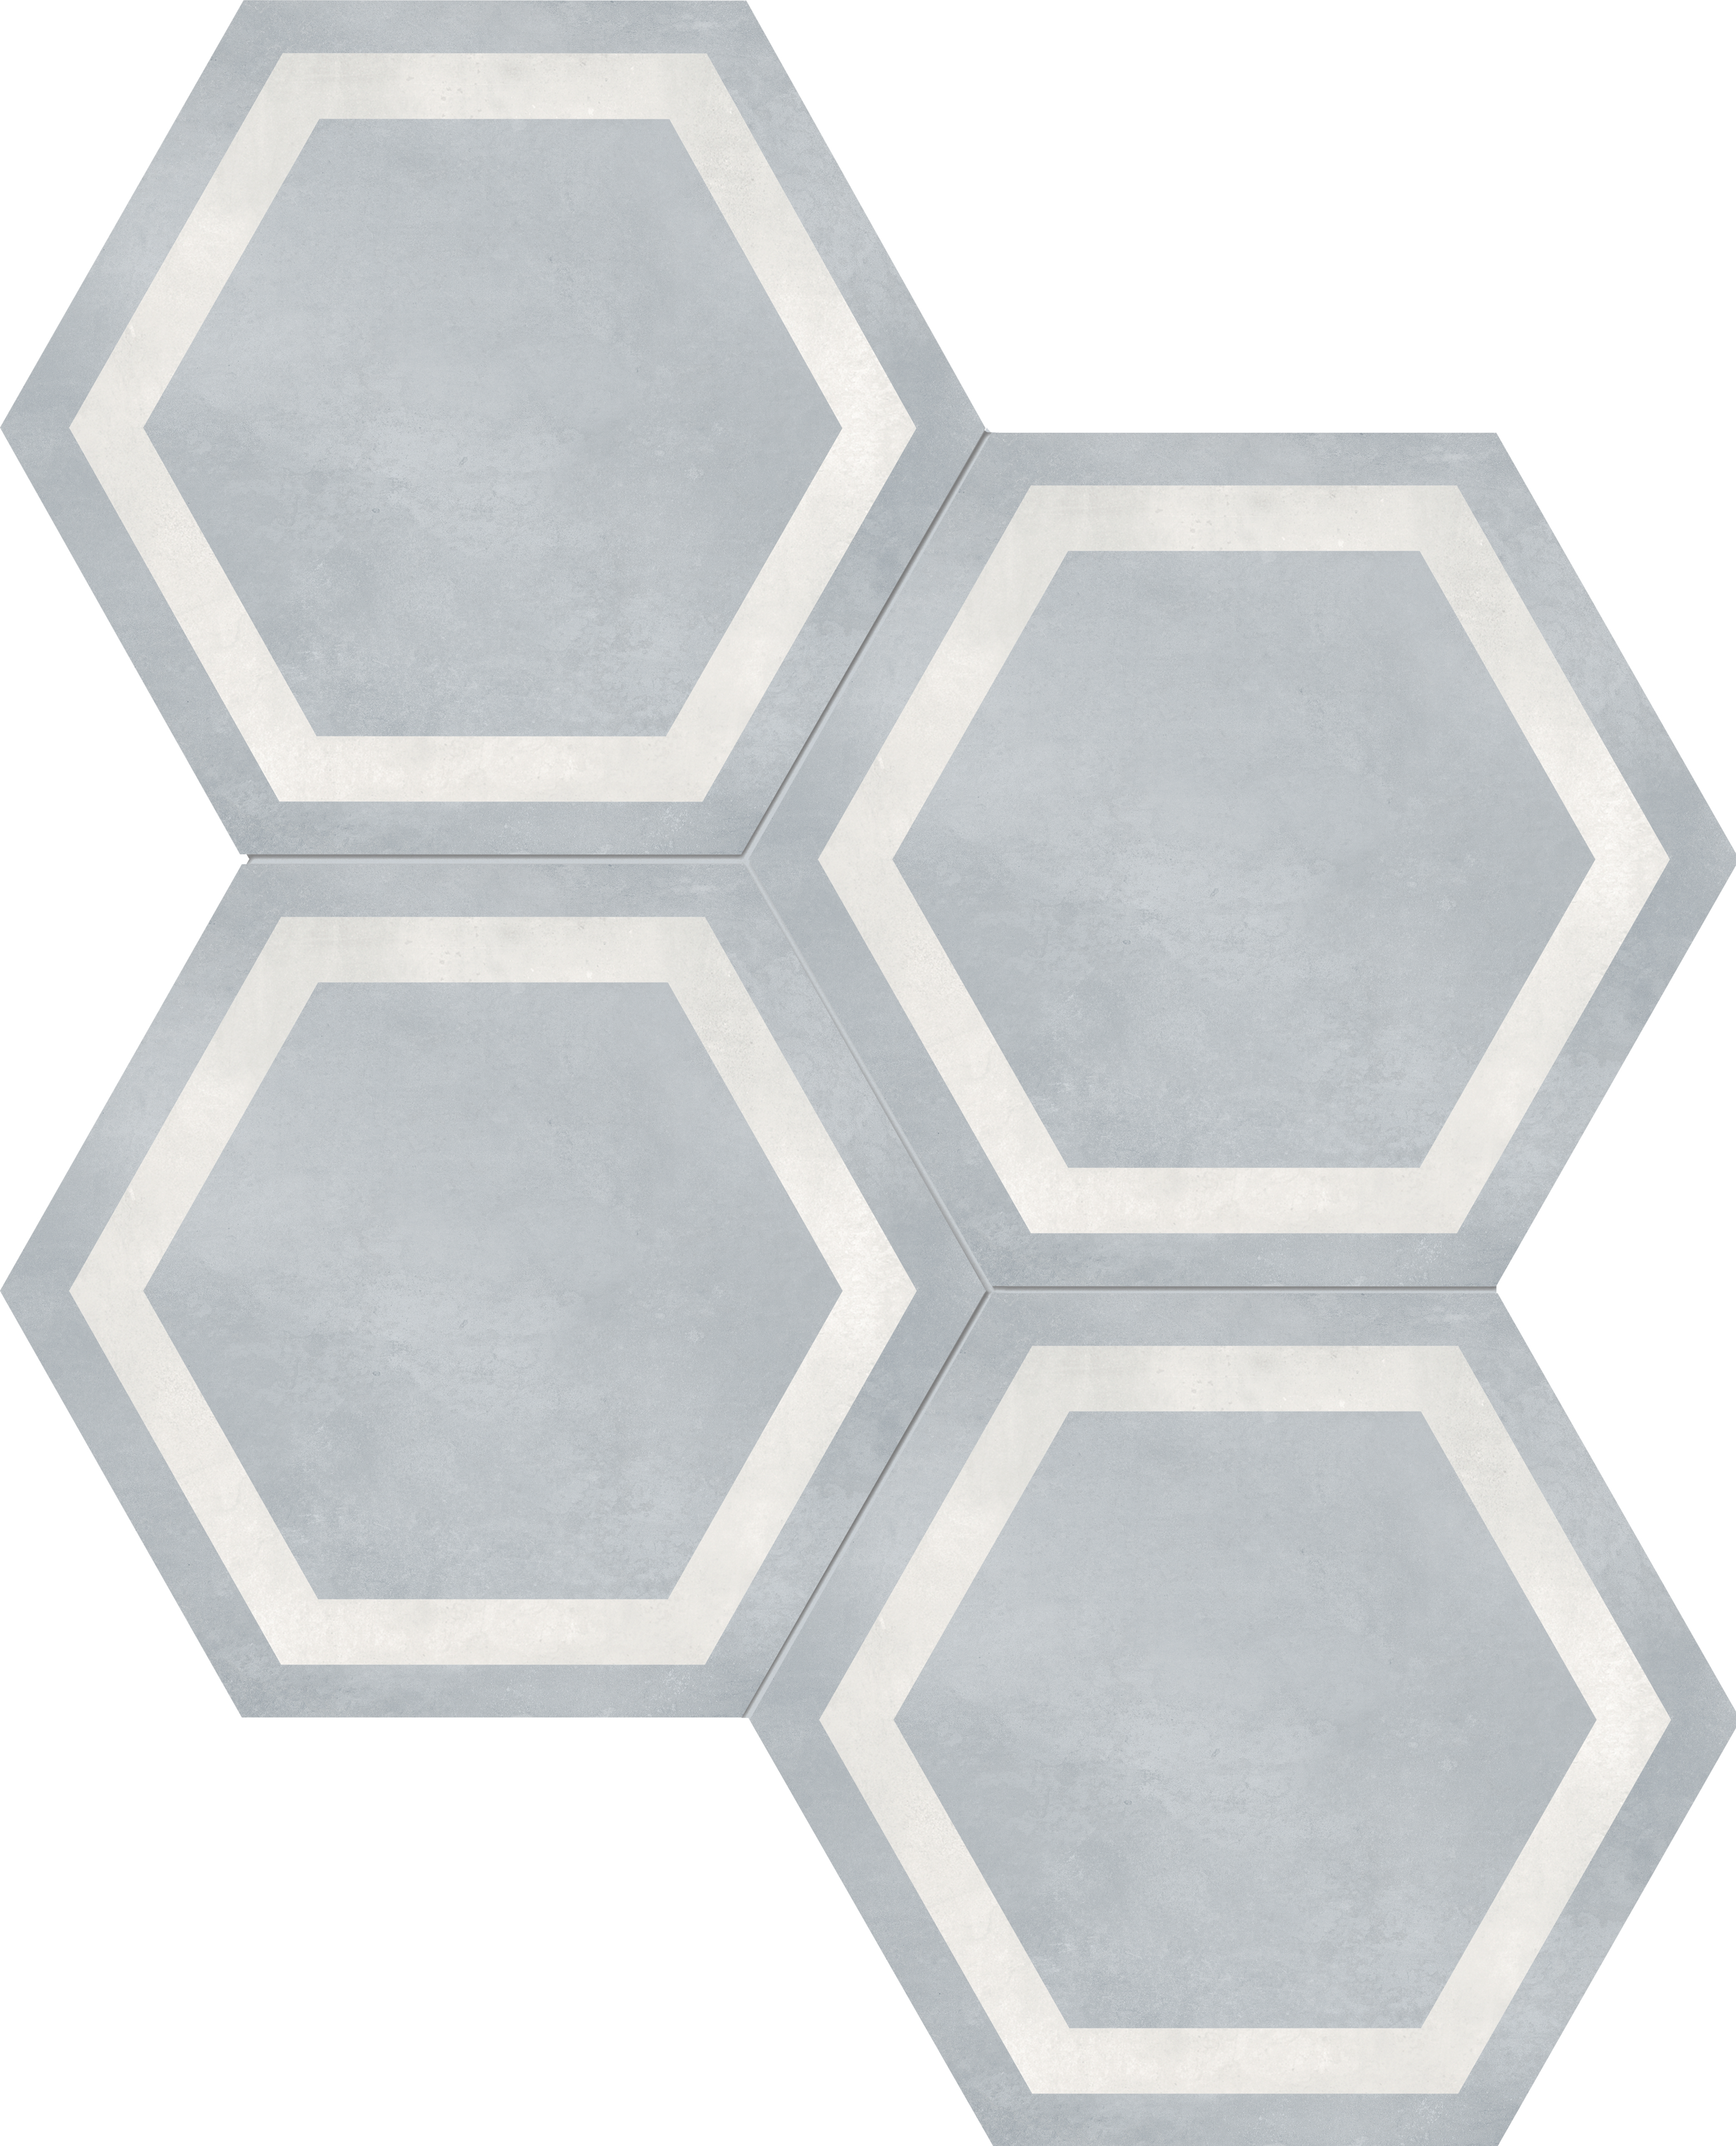 tide print pattern glazed porcelain deco tile from form anatolia collection distributed by surface group international matte finish pressed edge 7-inch hexagon shape